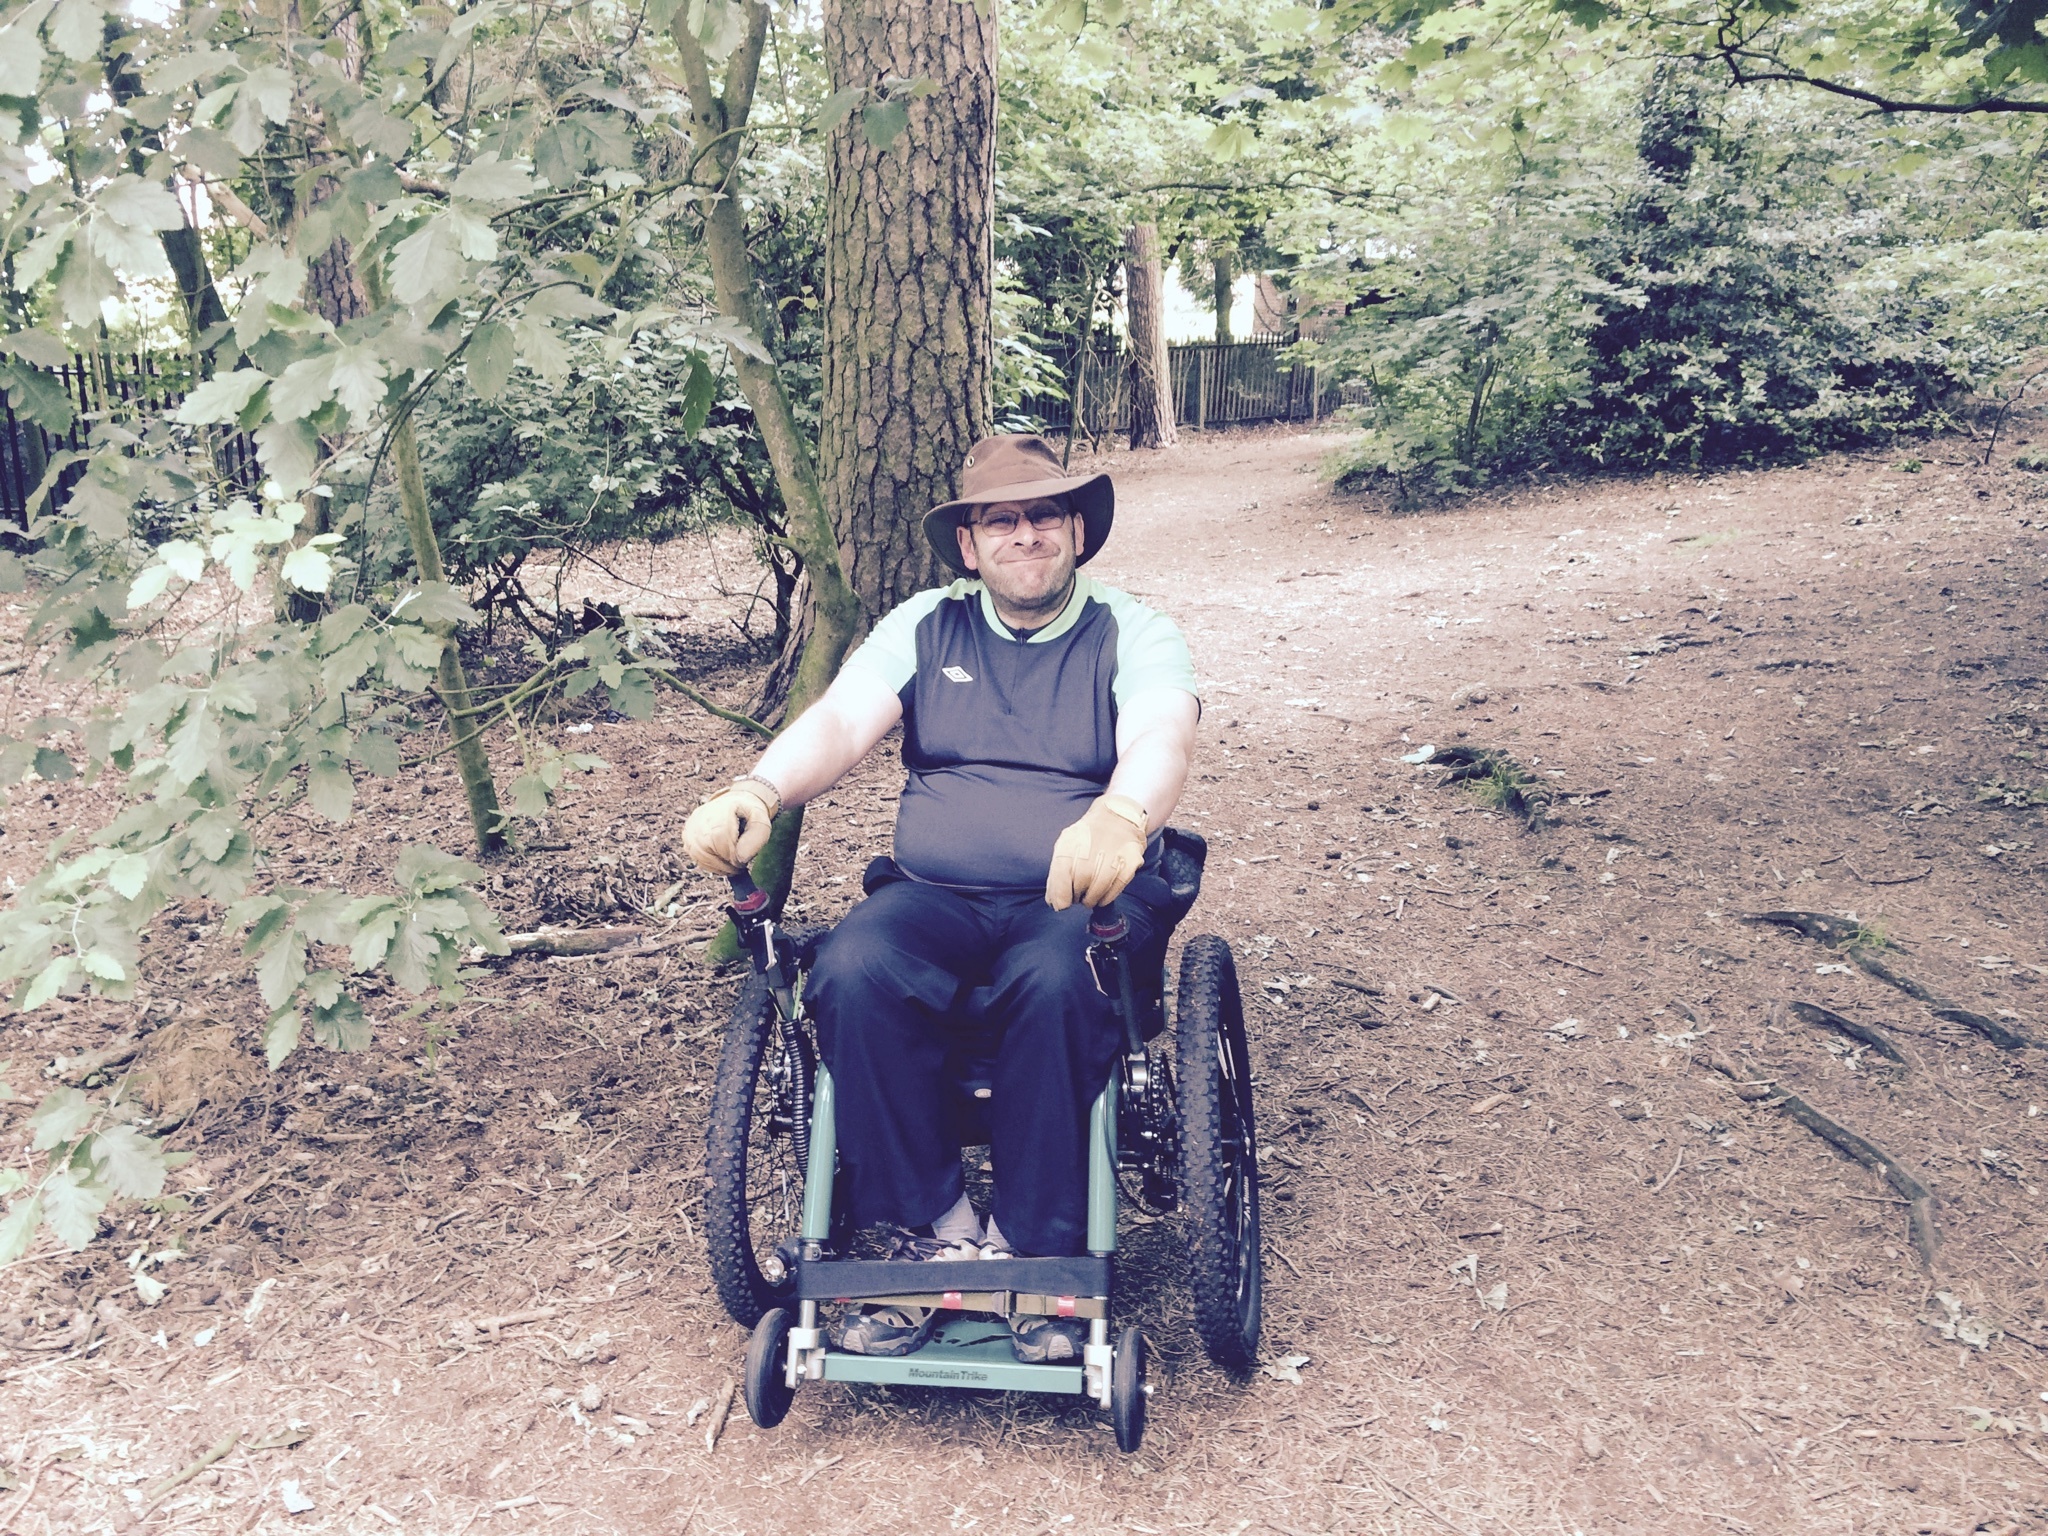 Excellent feedback following a year long test ride of the eTrike - the latest off-road wheelchair from Mountain Trike